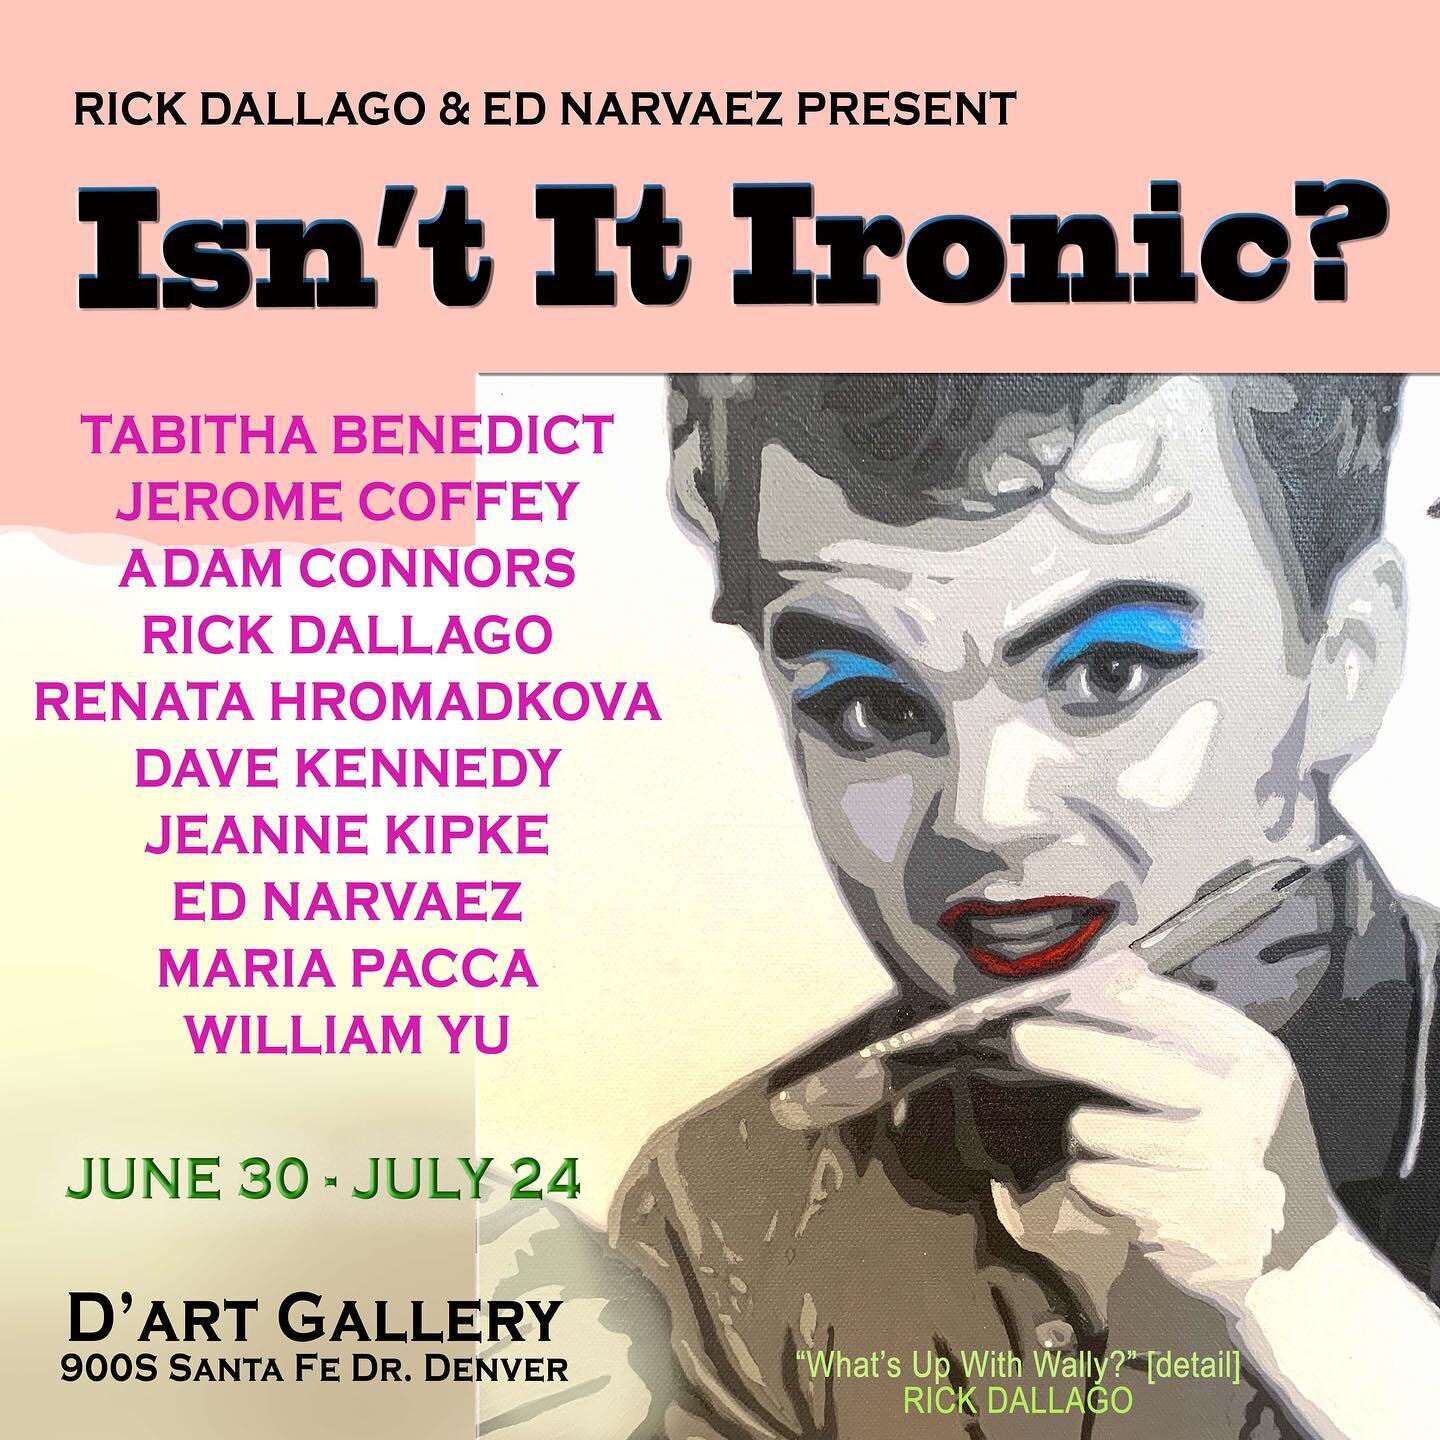 &ldquo;ISN&rsquo;T IT IRONIC?&rdquo; Check out new group exhibit I curated with @ednarvaezart at Dart Gallery in Denver. June 30-July 24. 10 artists proving there is irony in the Flatirons.  @jeannekipke @adam.j.connors_artist @paccastudios @tabitha.